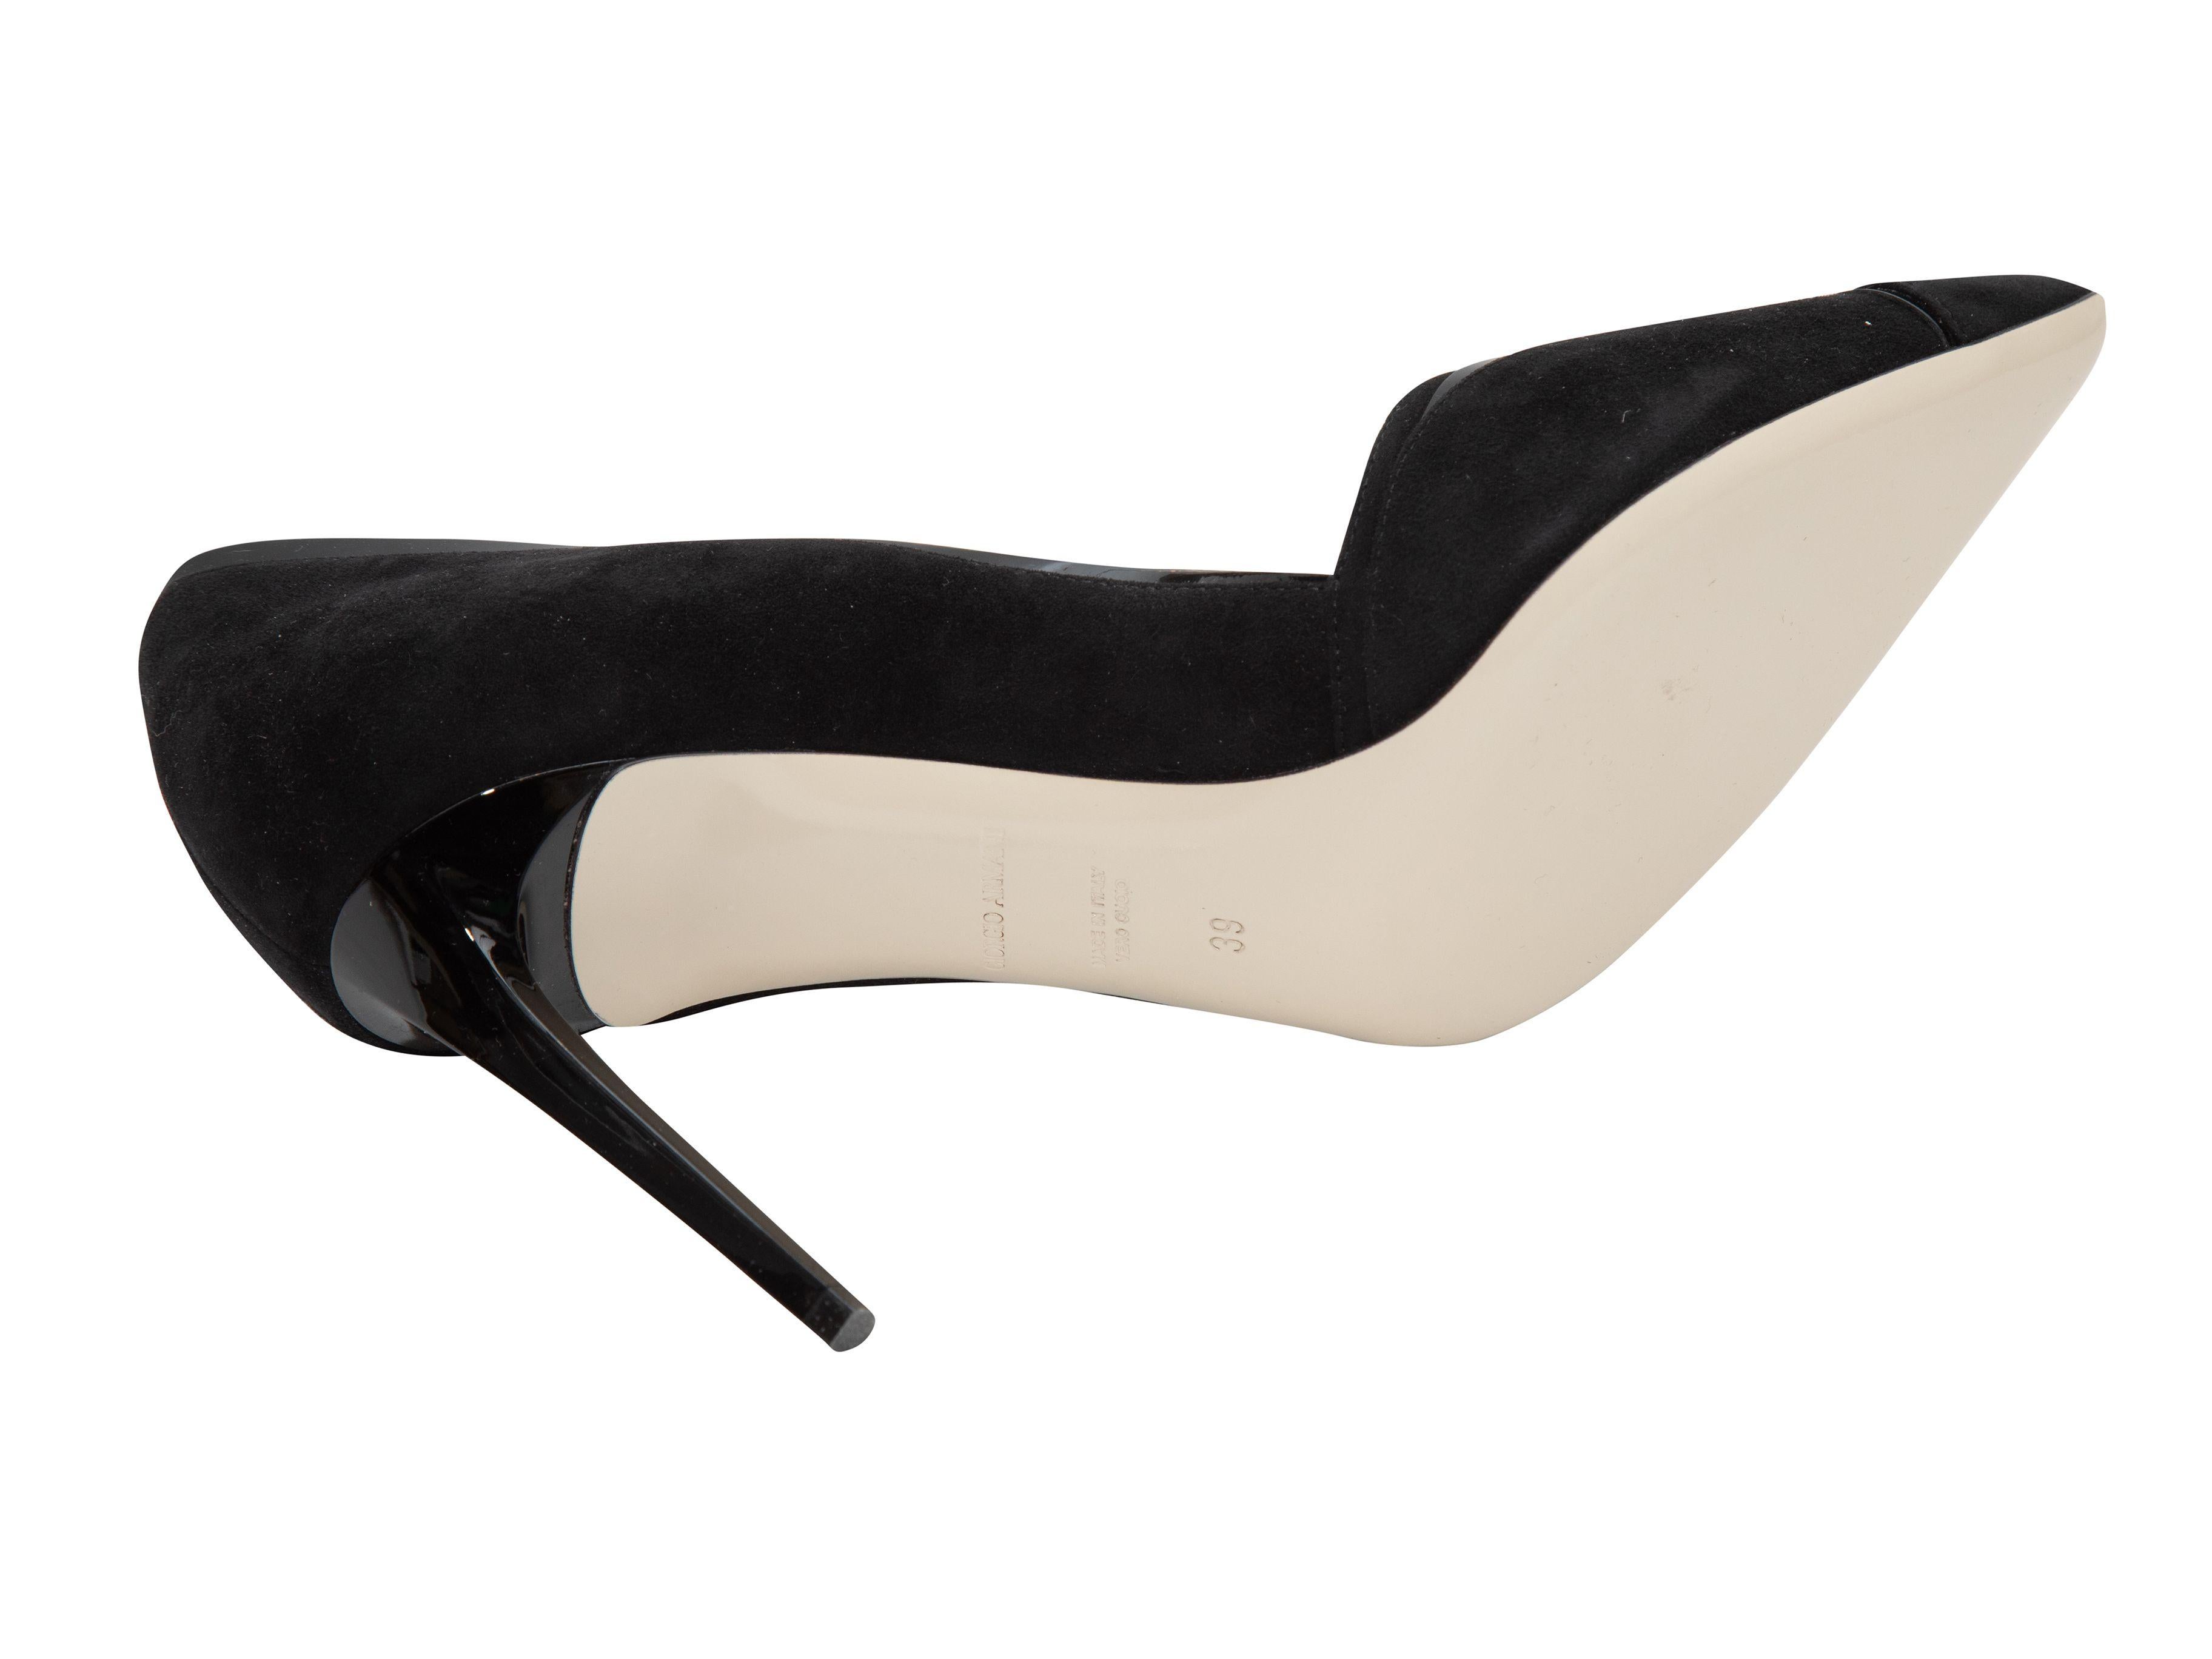 Product Details: Black suede and patent leather pointed-toe pumps by Giorgio Armani. Cutouts at toes. Lacquered heels. 4